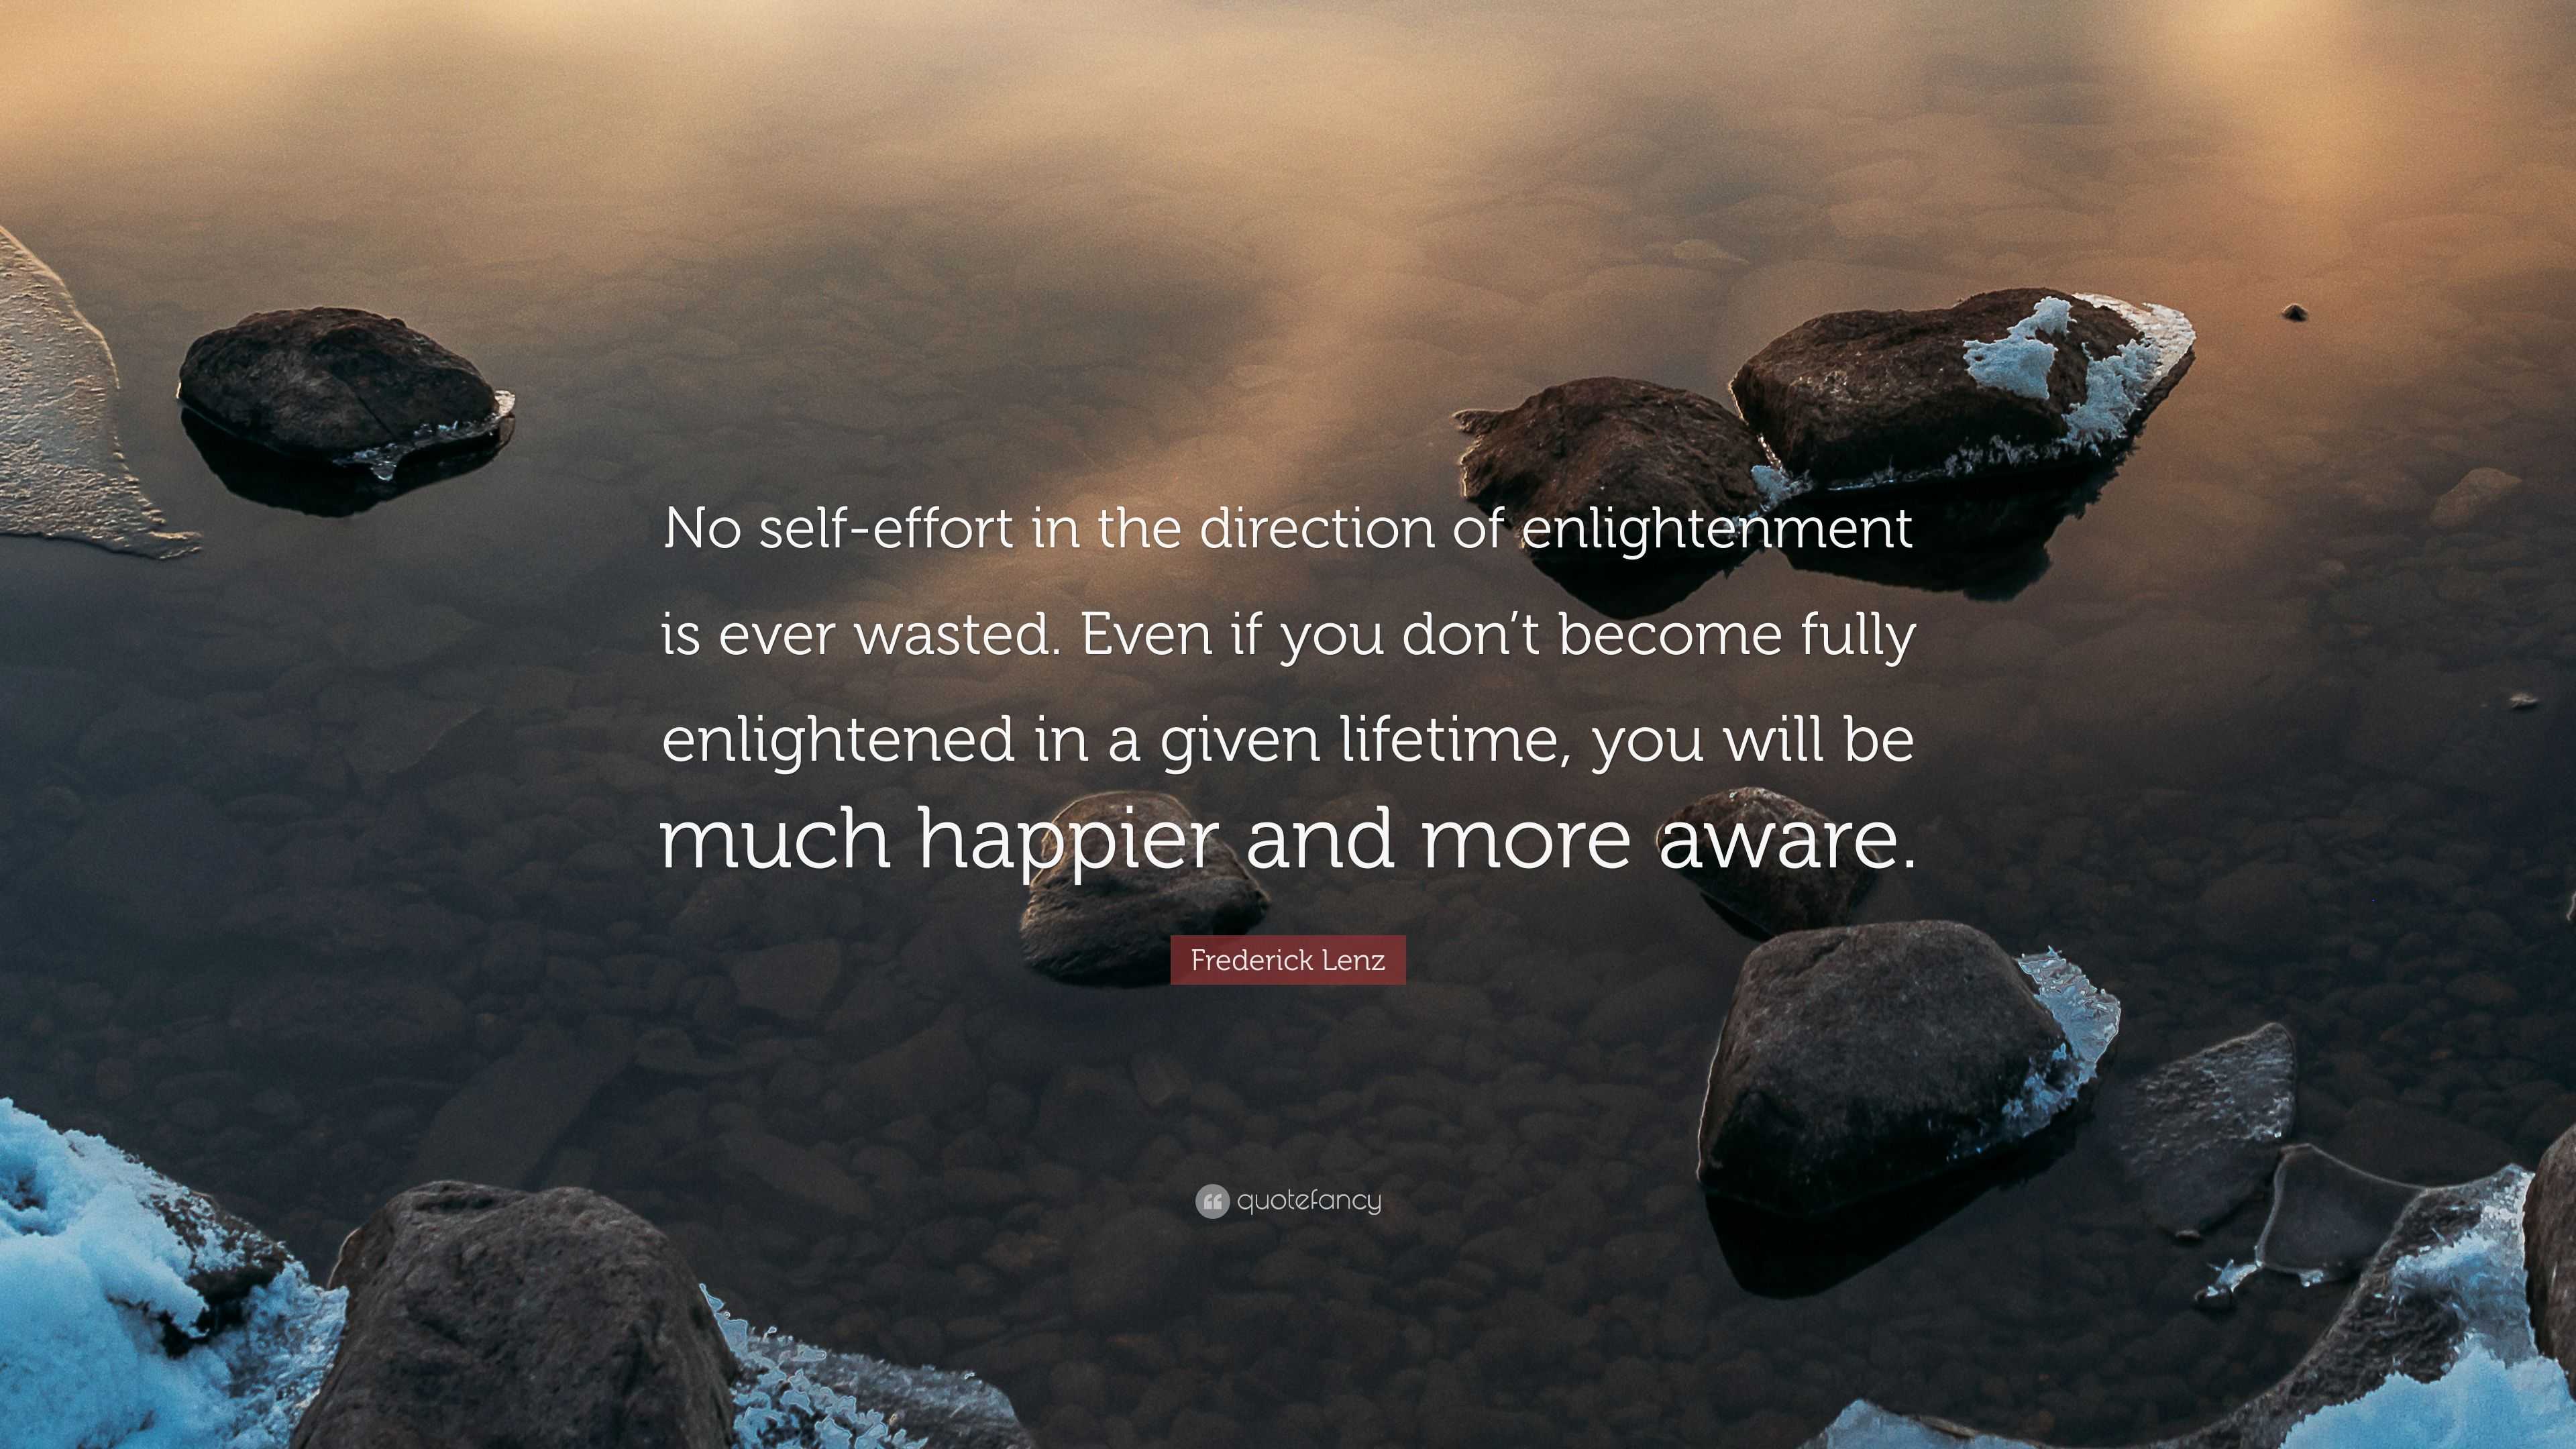 Frederick Lenz Quote: “No self-effort in the direction of enlightenment ...